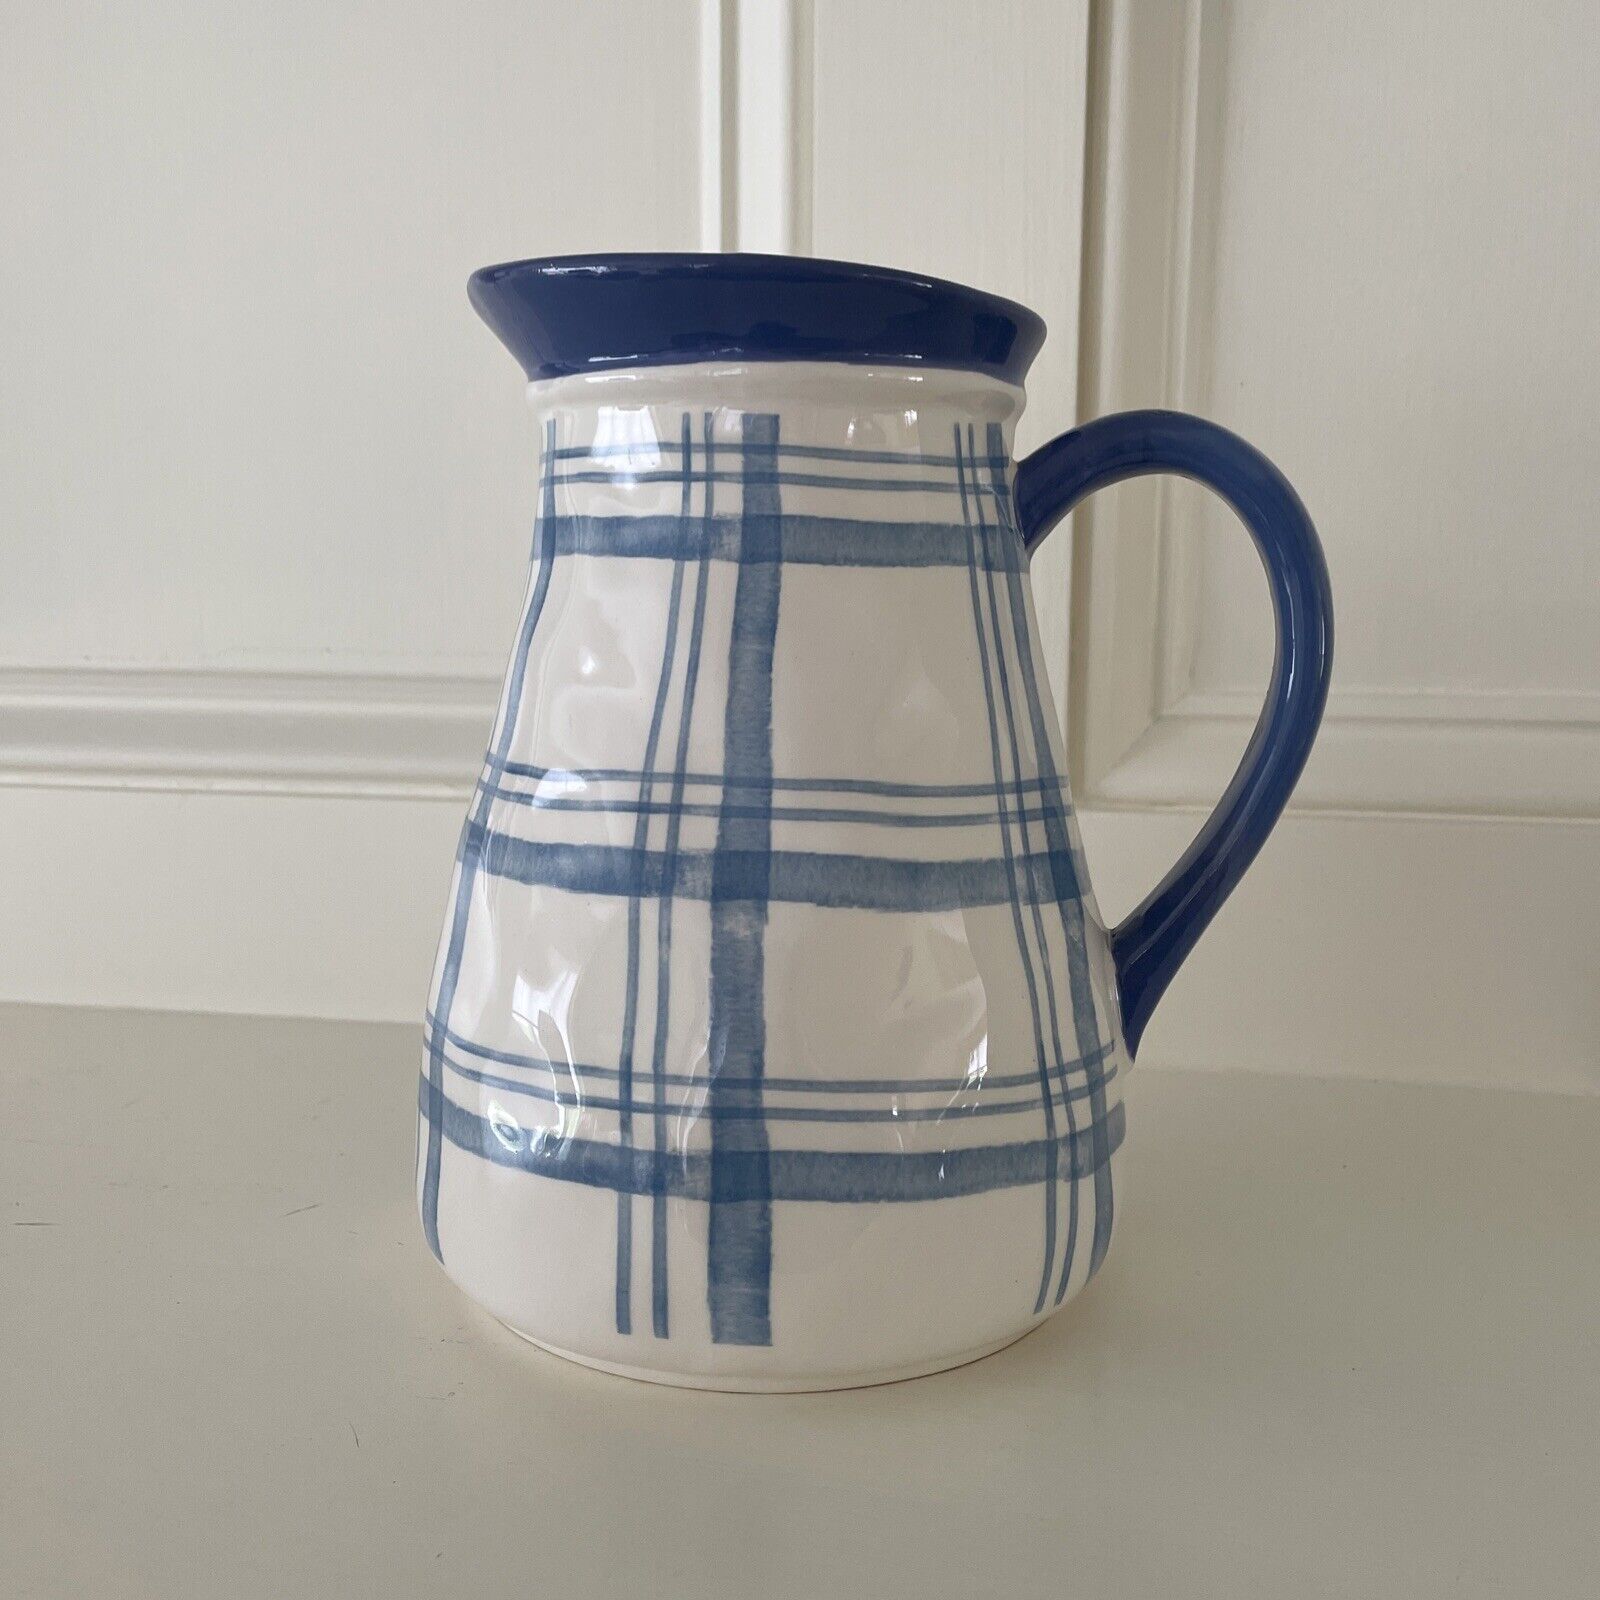 NWT Pier 1 White and Blue Pitcher